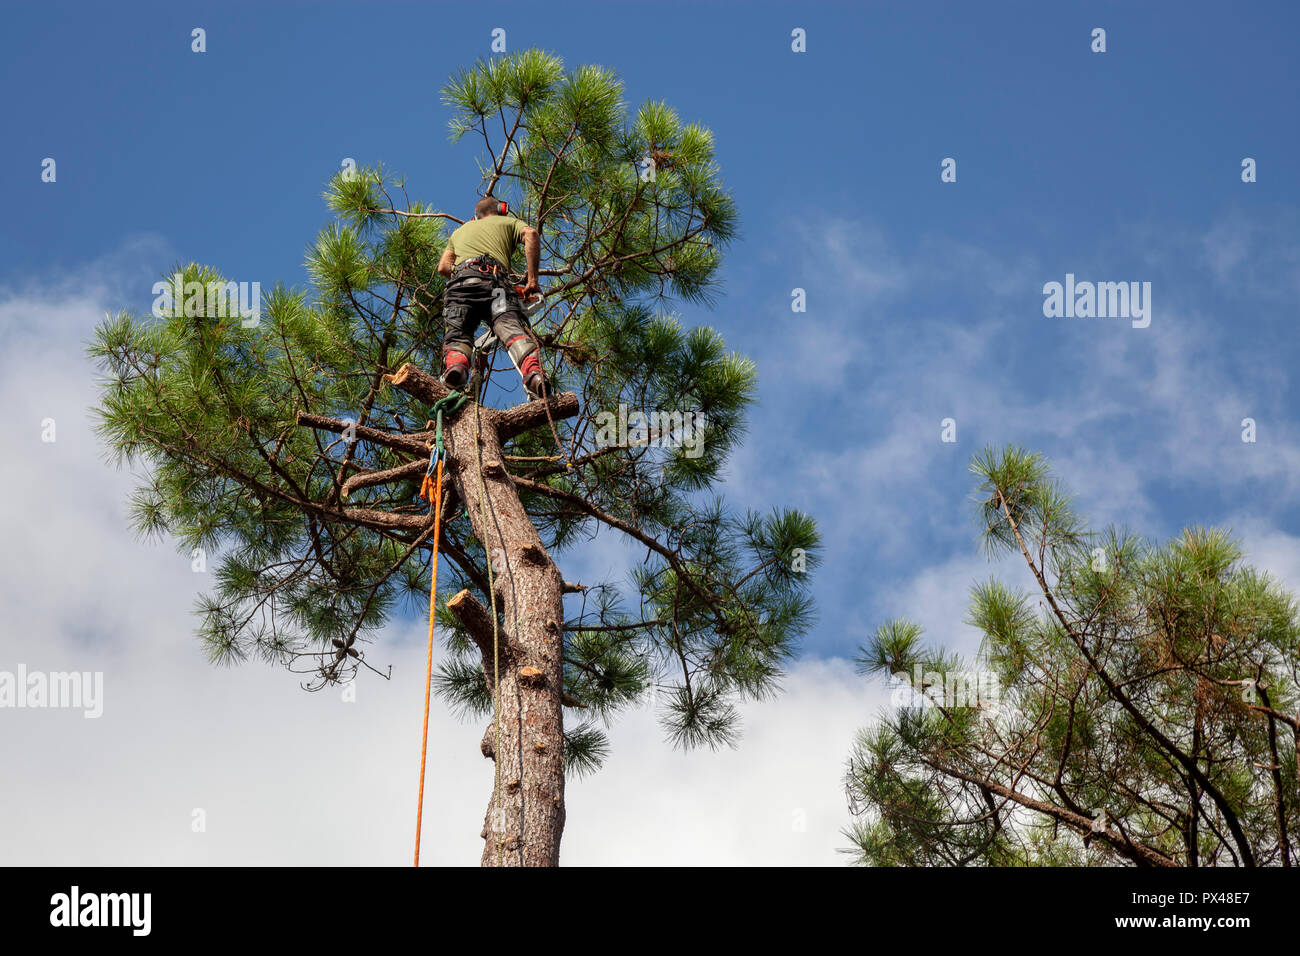 Professional woodcutter into action near a house. The felling of high pine trees necessitates the cutting down of their boles from the top downwards. Stock Photo